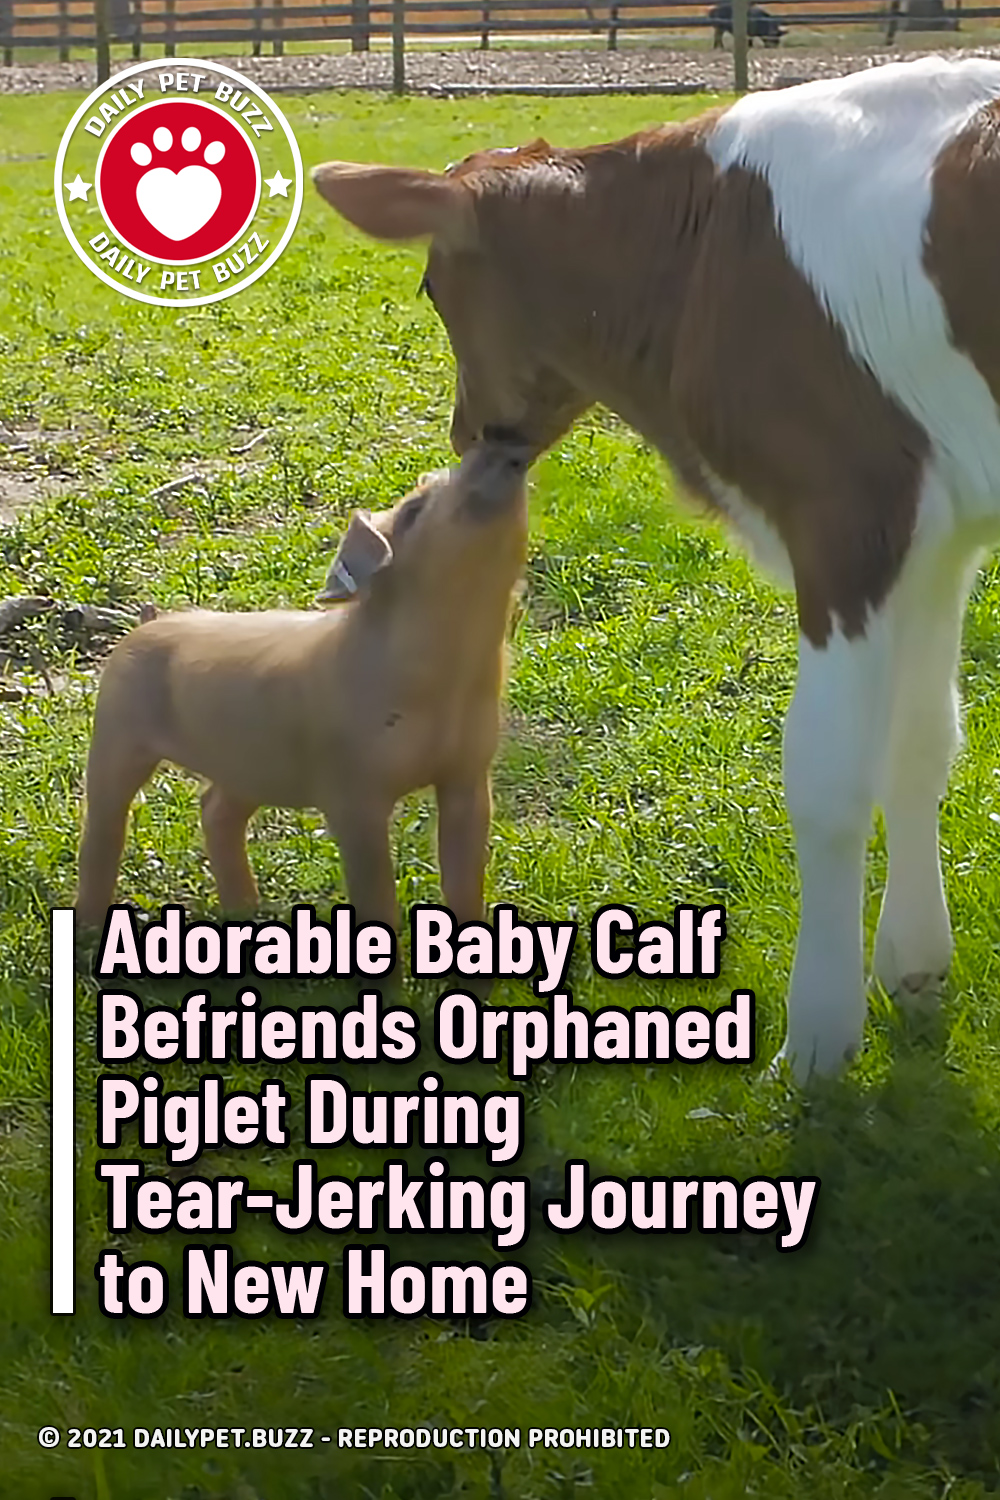 Adorable Baby Calf Befriends Orphaned Piglet During Tear-Jerking Journey to New Home